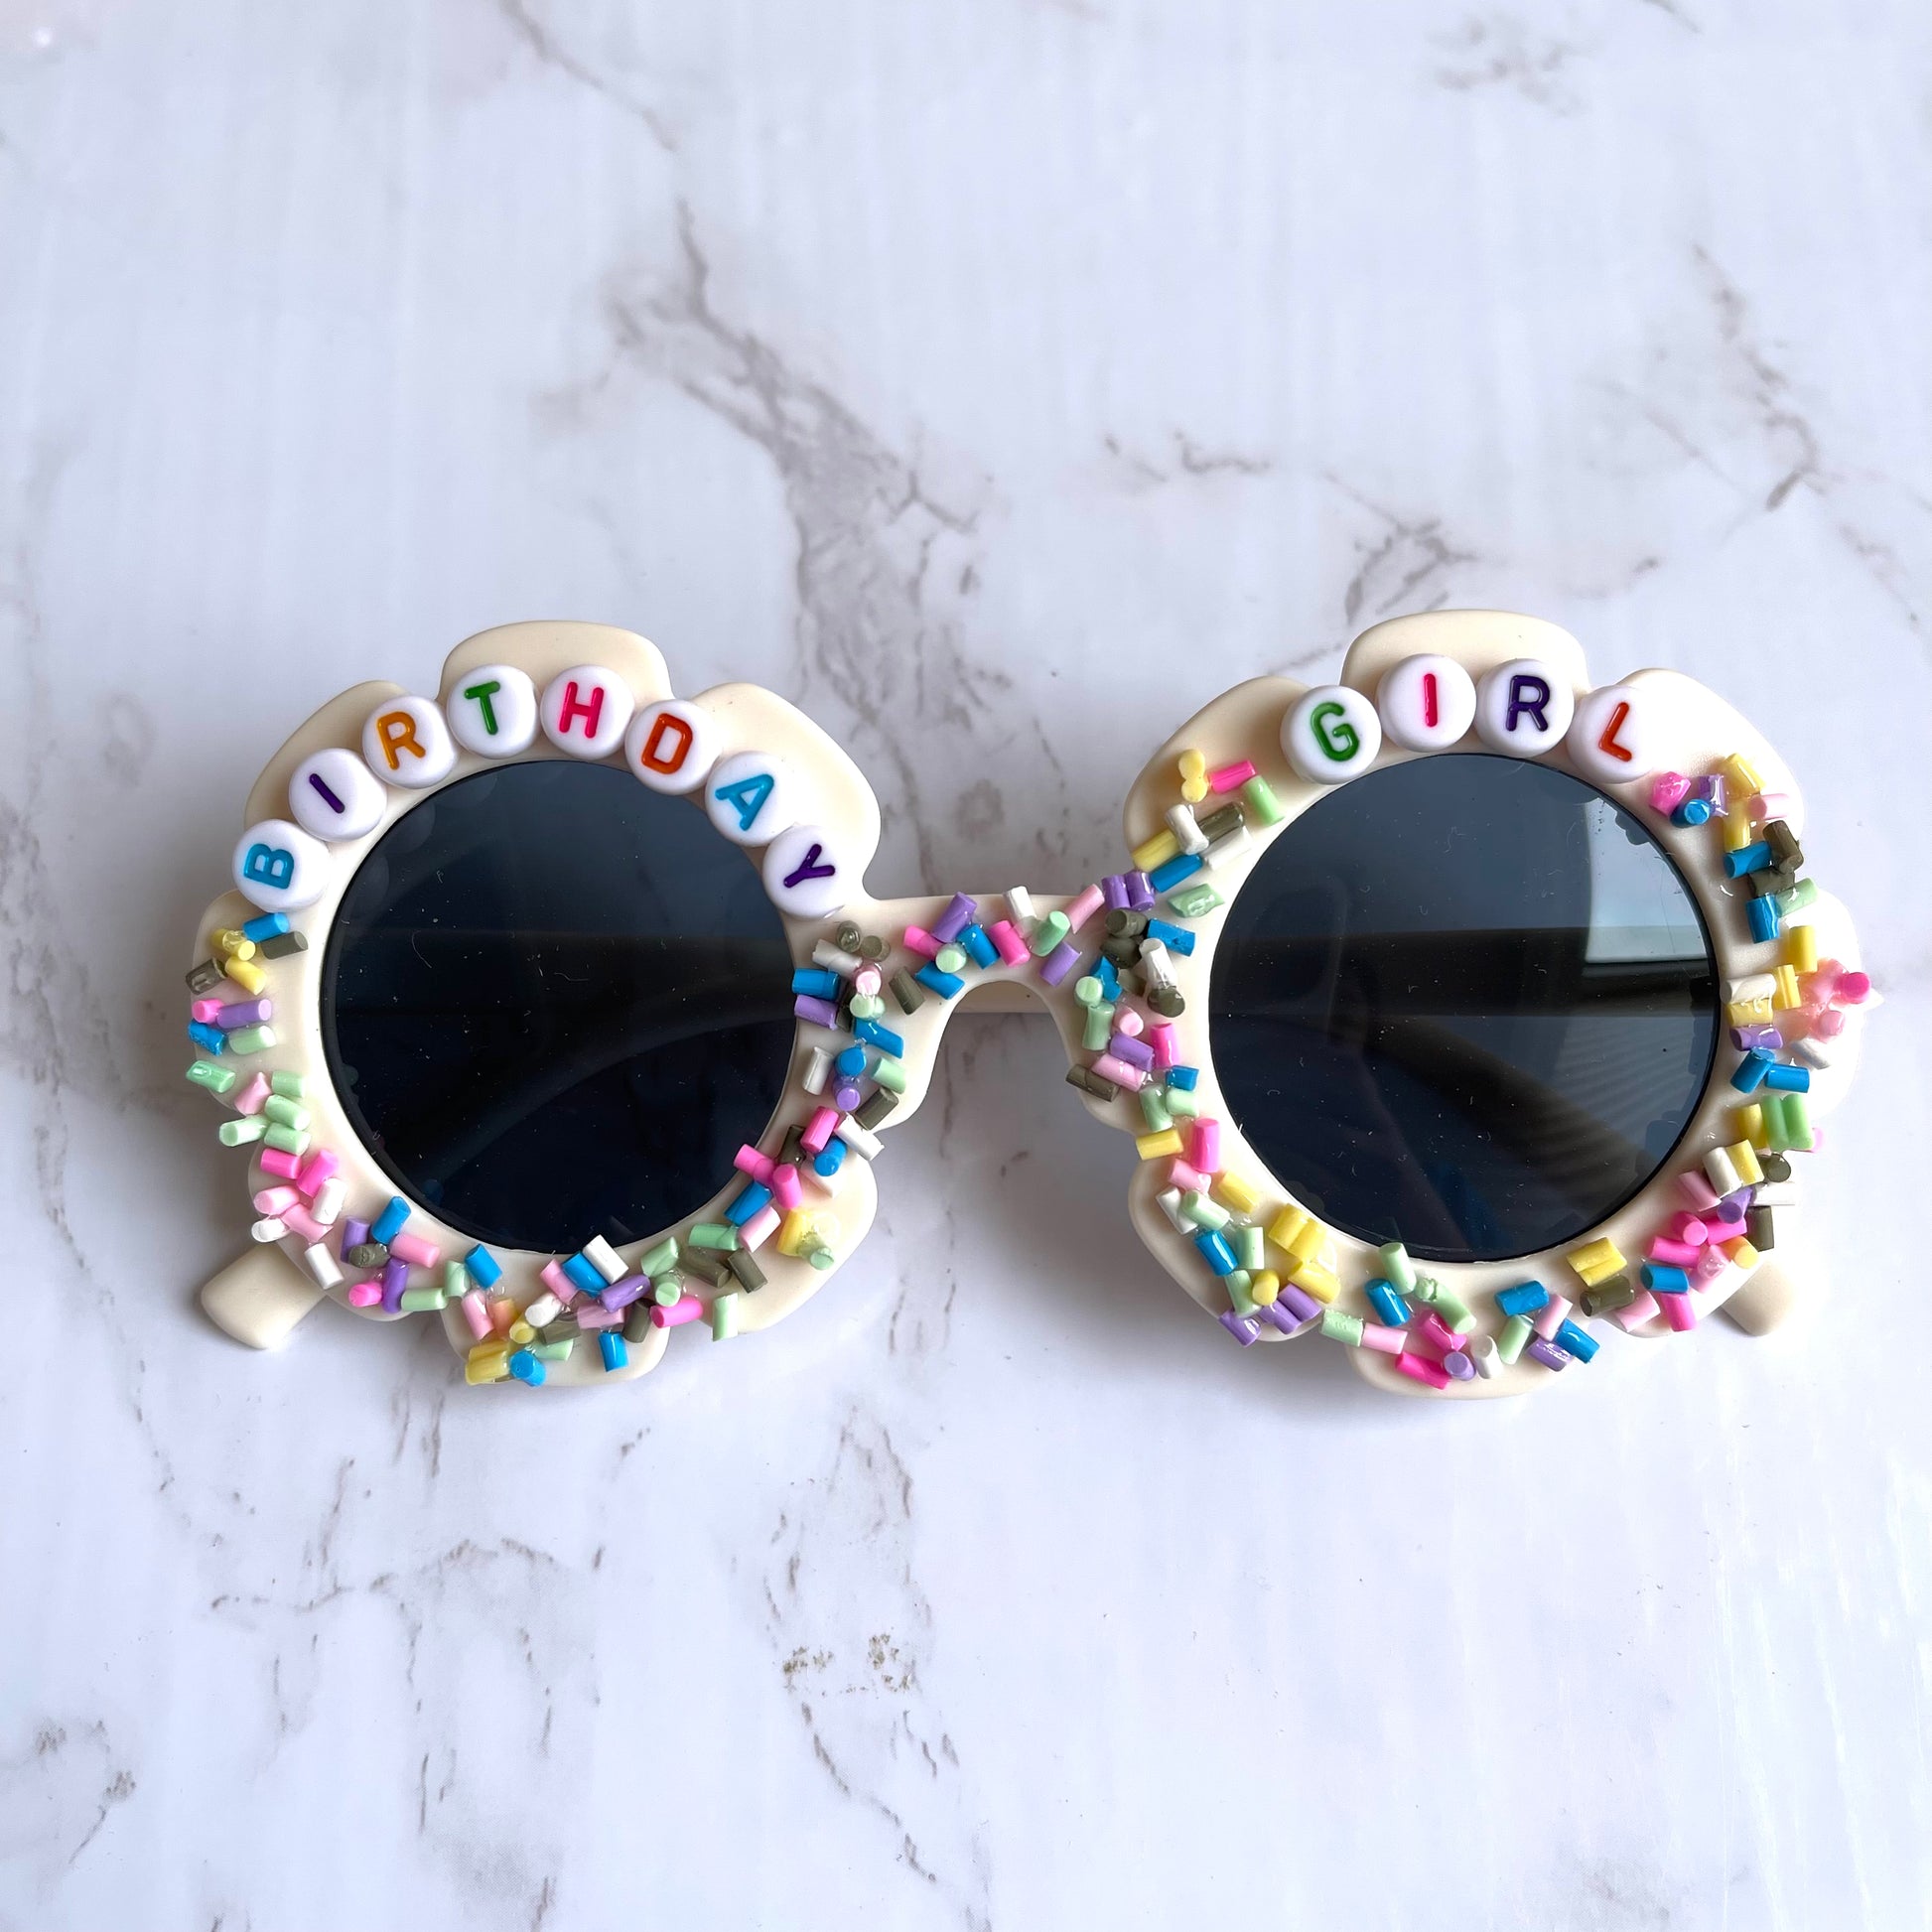 Personalized Sunglasses with Sprinkles